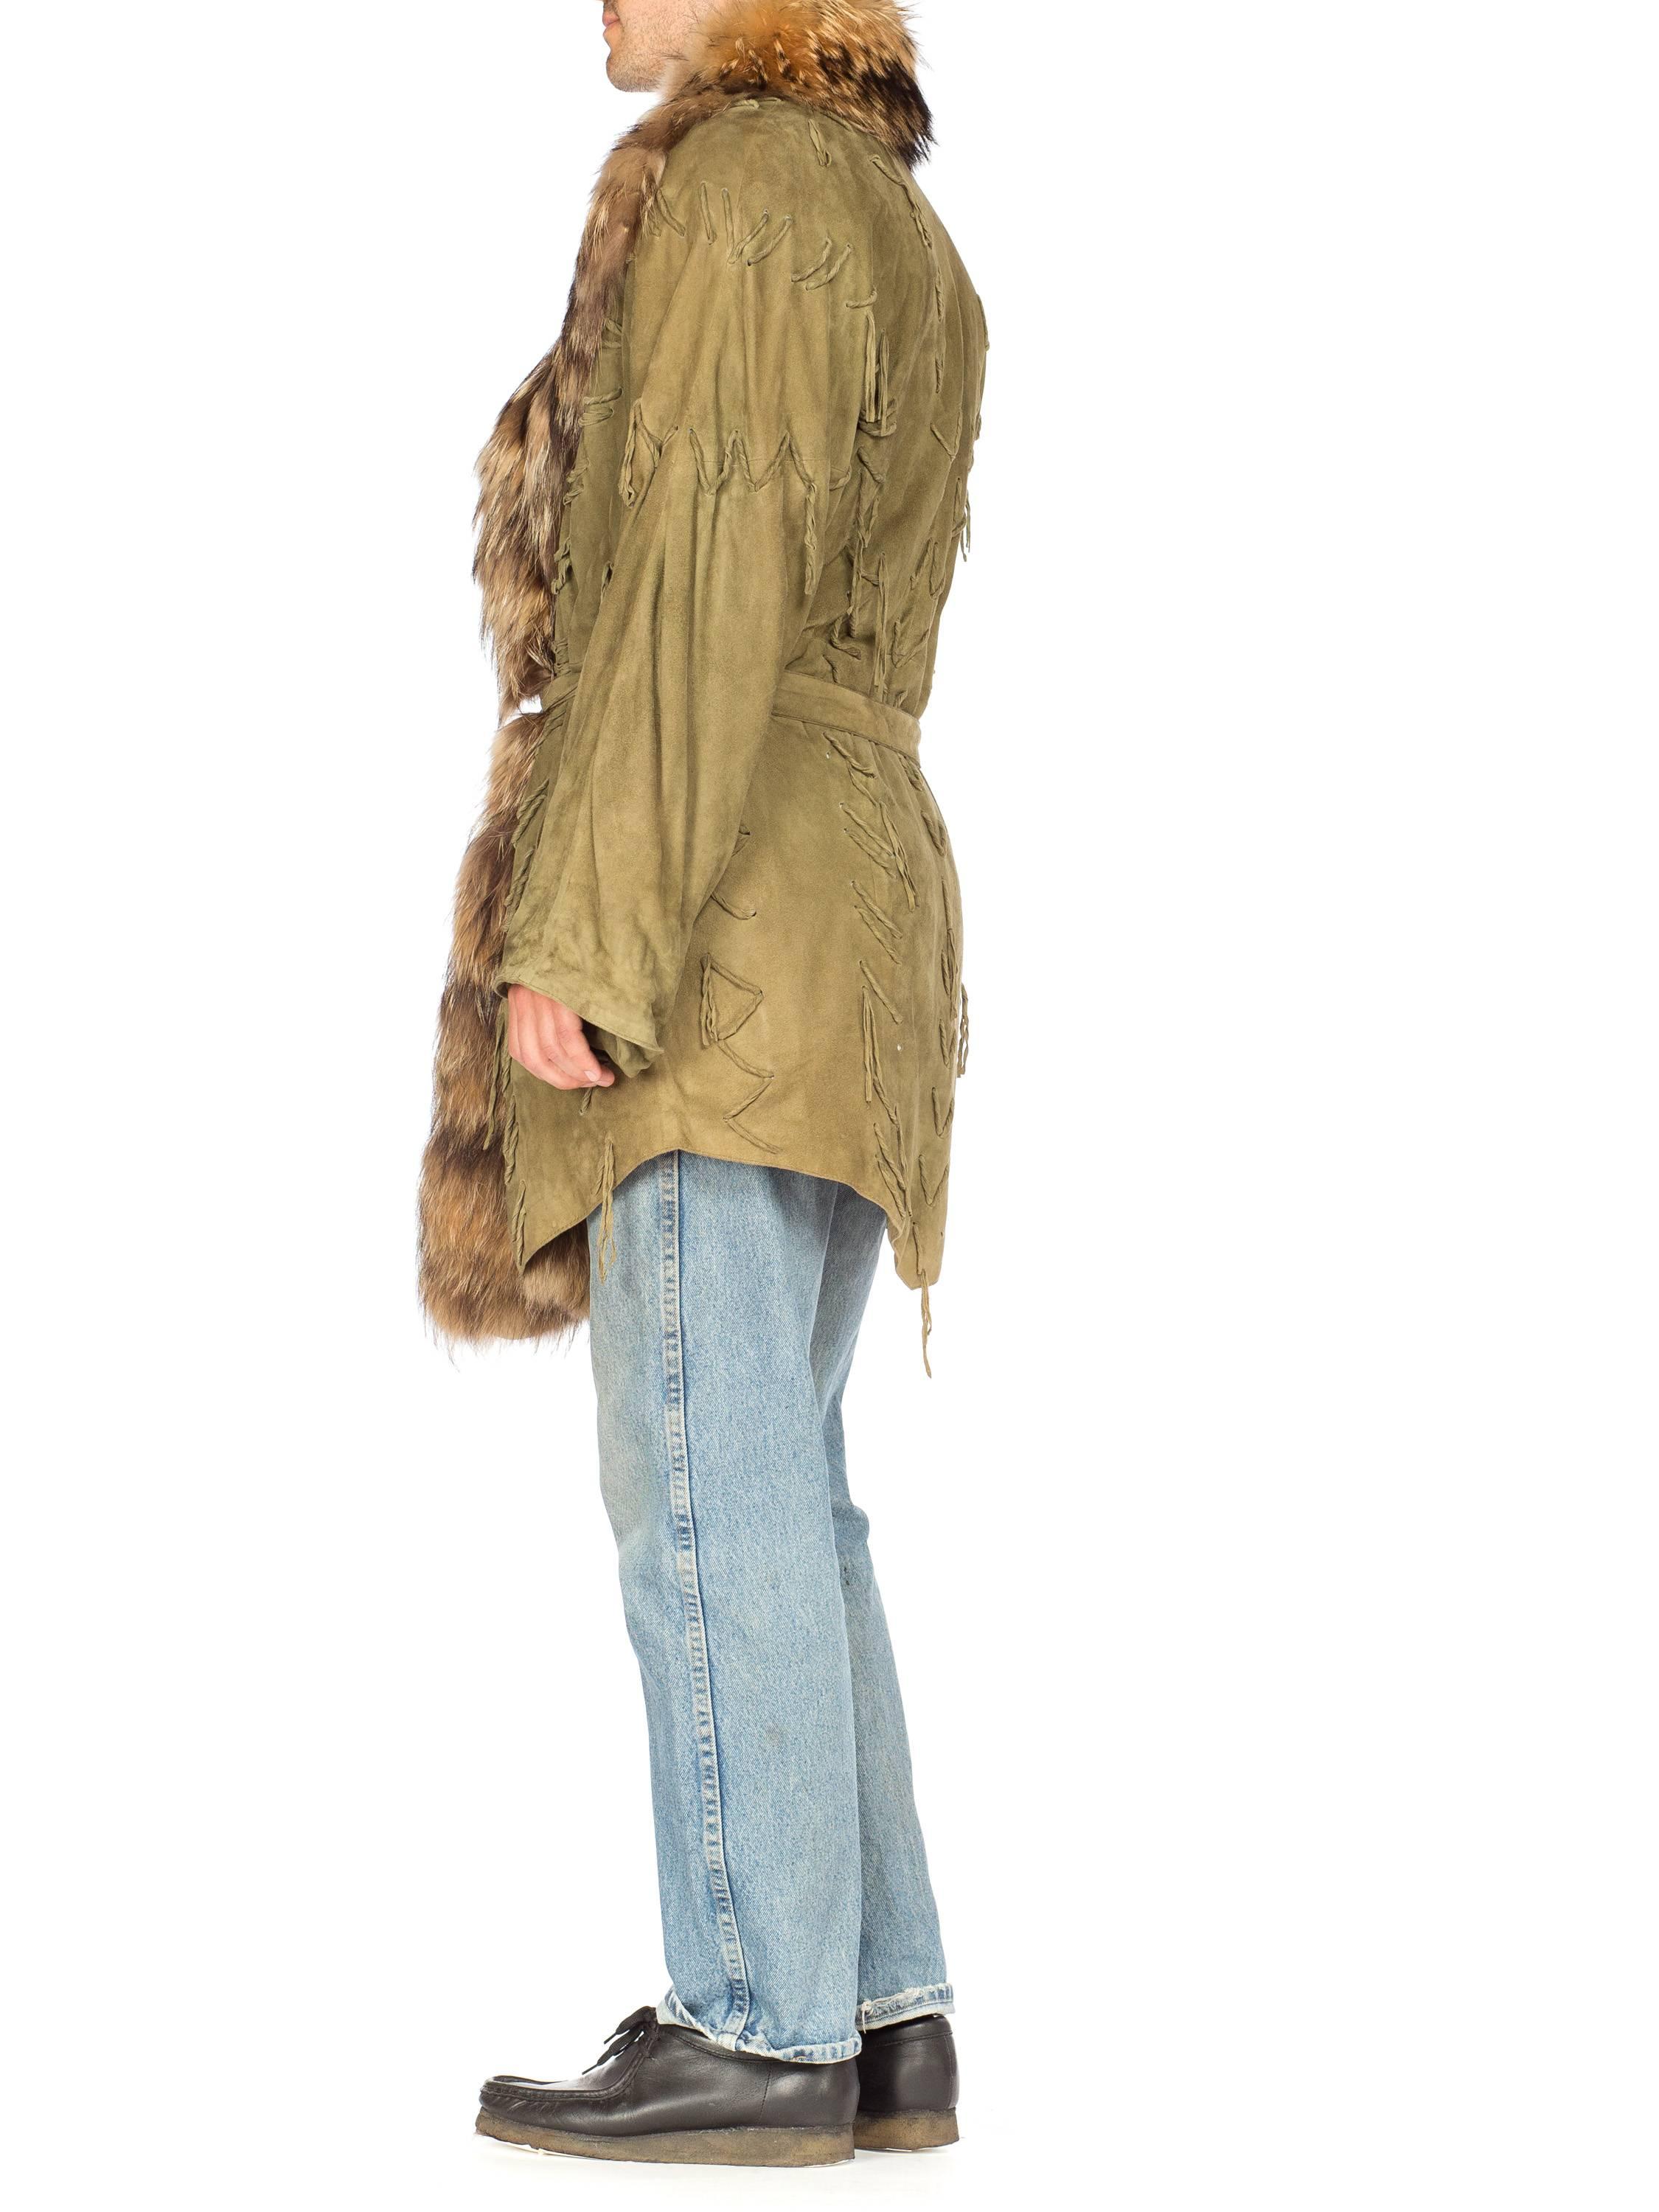 Embroidered Suede Jacket with Large Fur Collar, 1970s 1